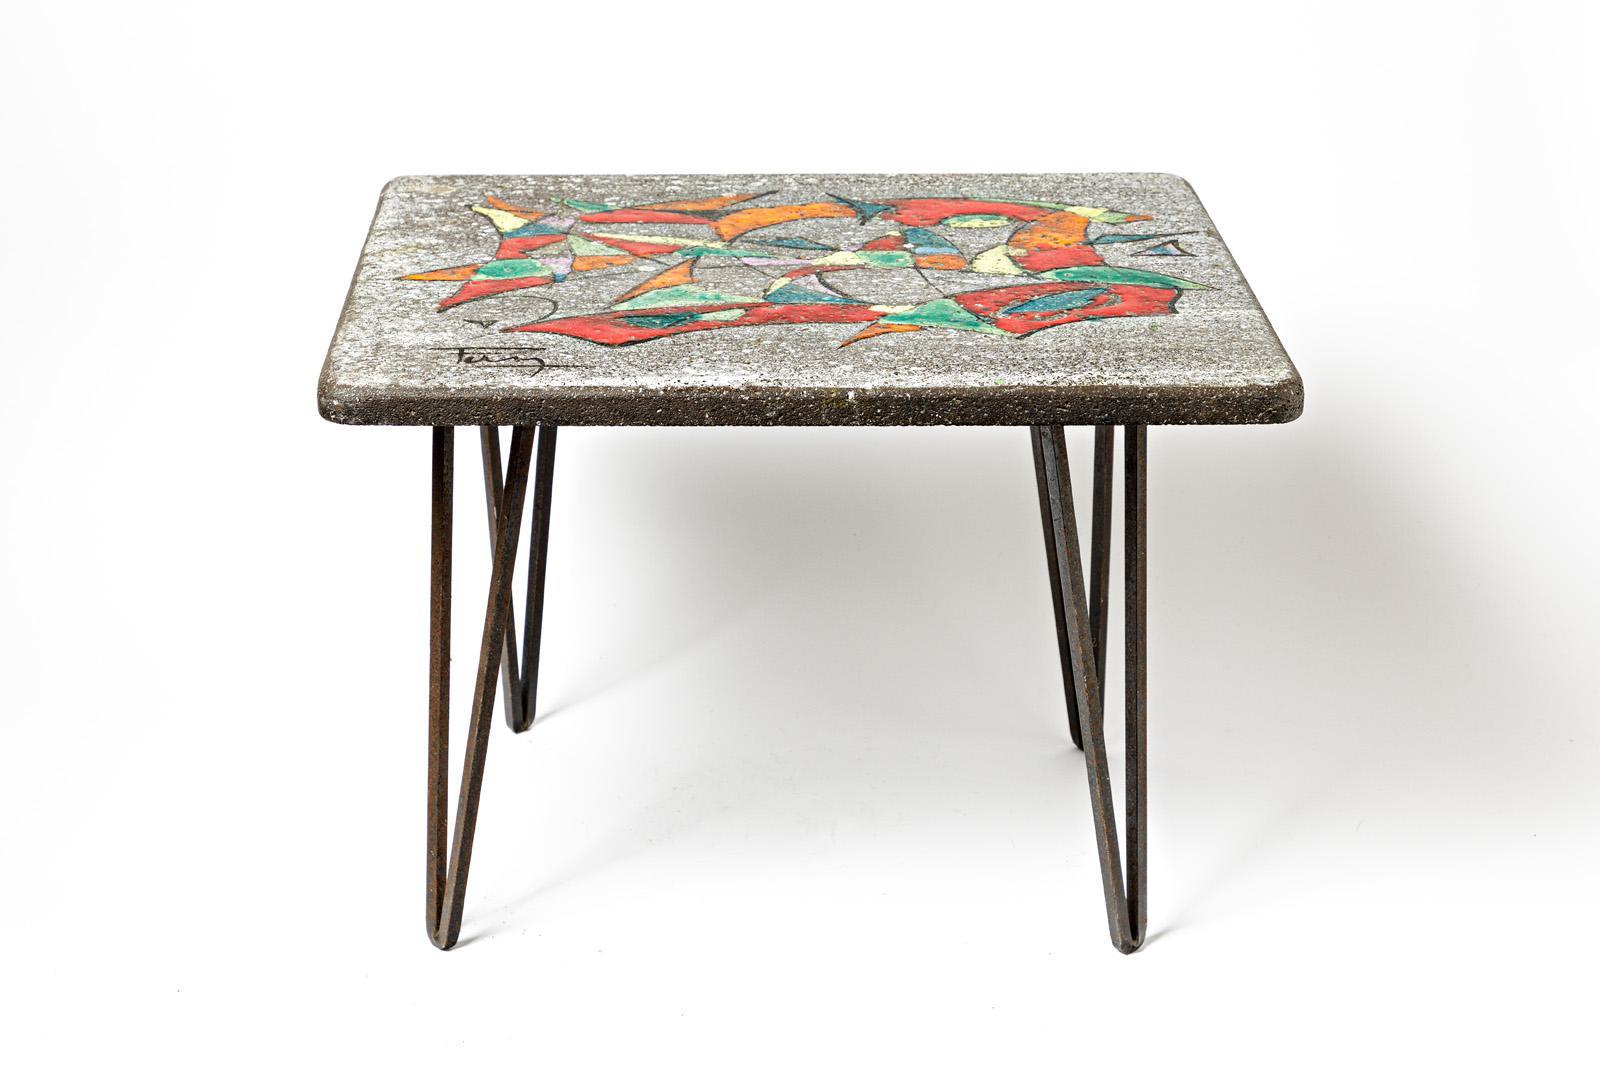 France - circa 1970

Low sofa ceramic table 20th century design

Grey and abstract colors ceramic glazes

Original good condition

Signed

Height 42 cm
Large 45 cm
Long 57 cm